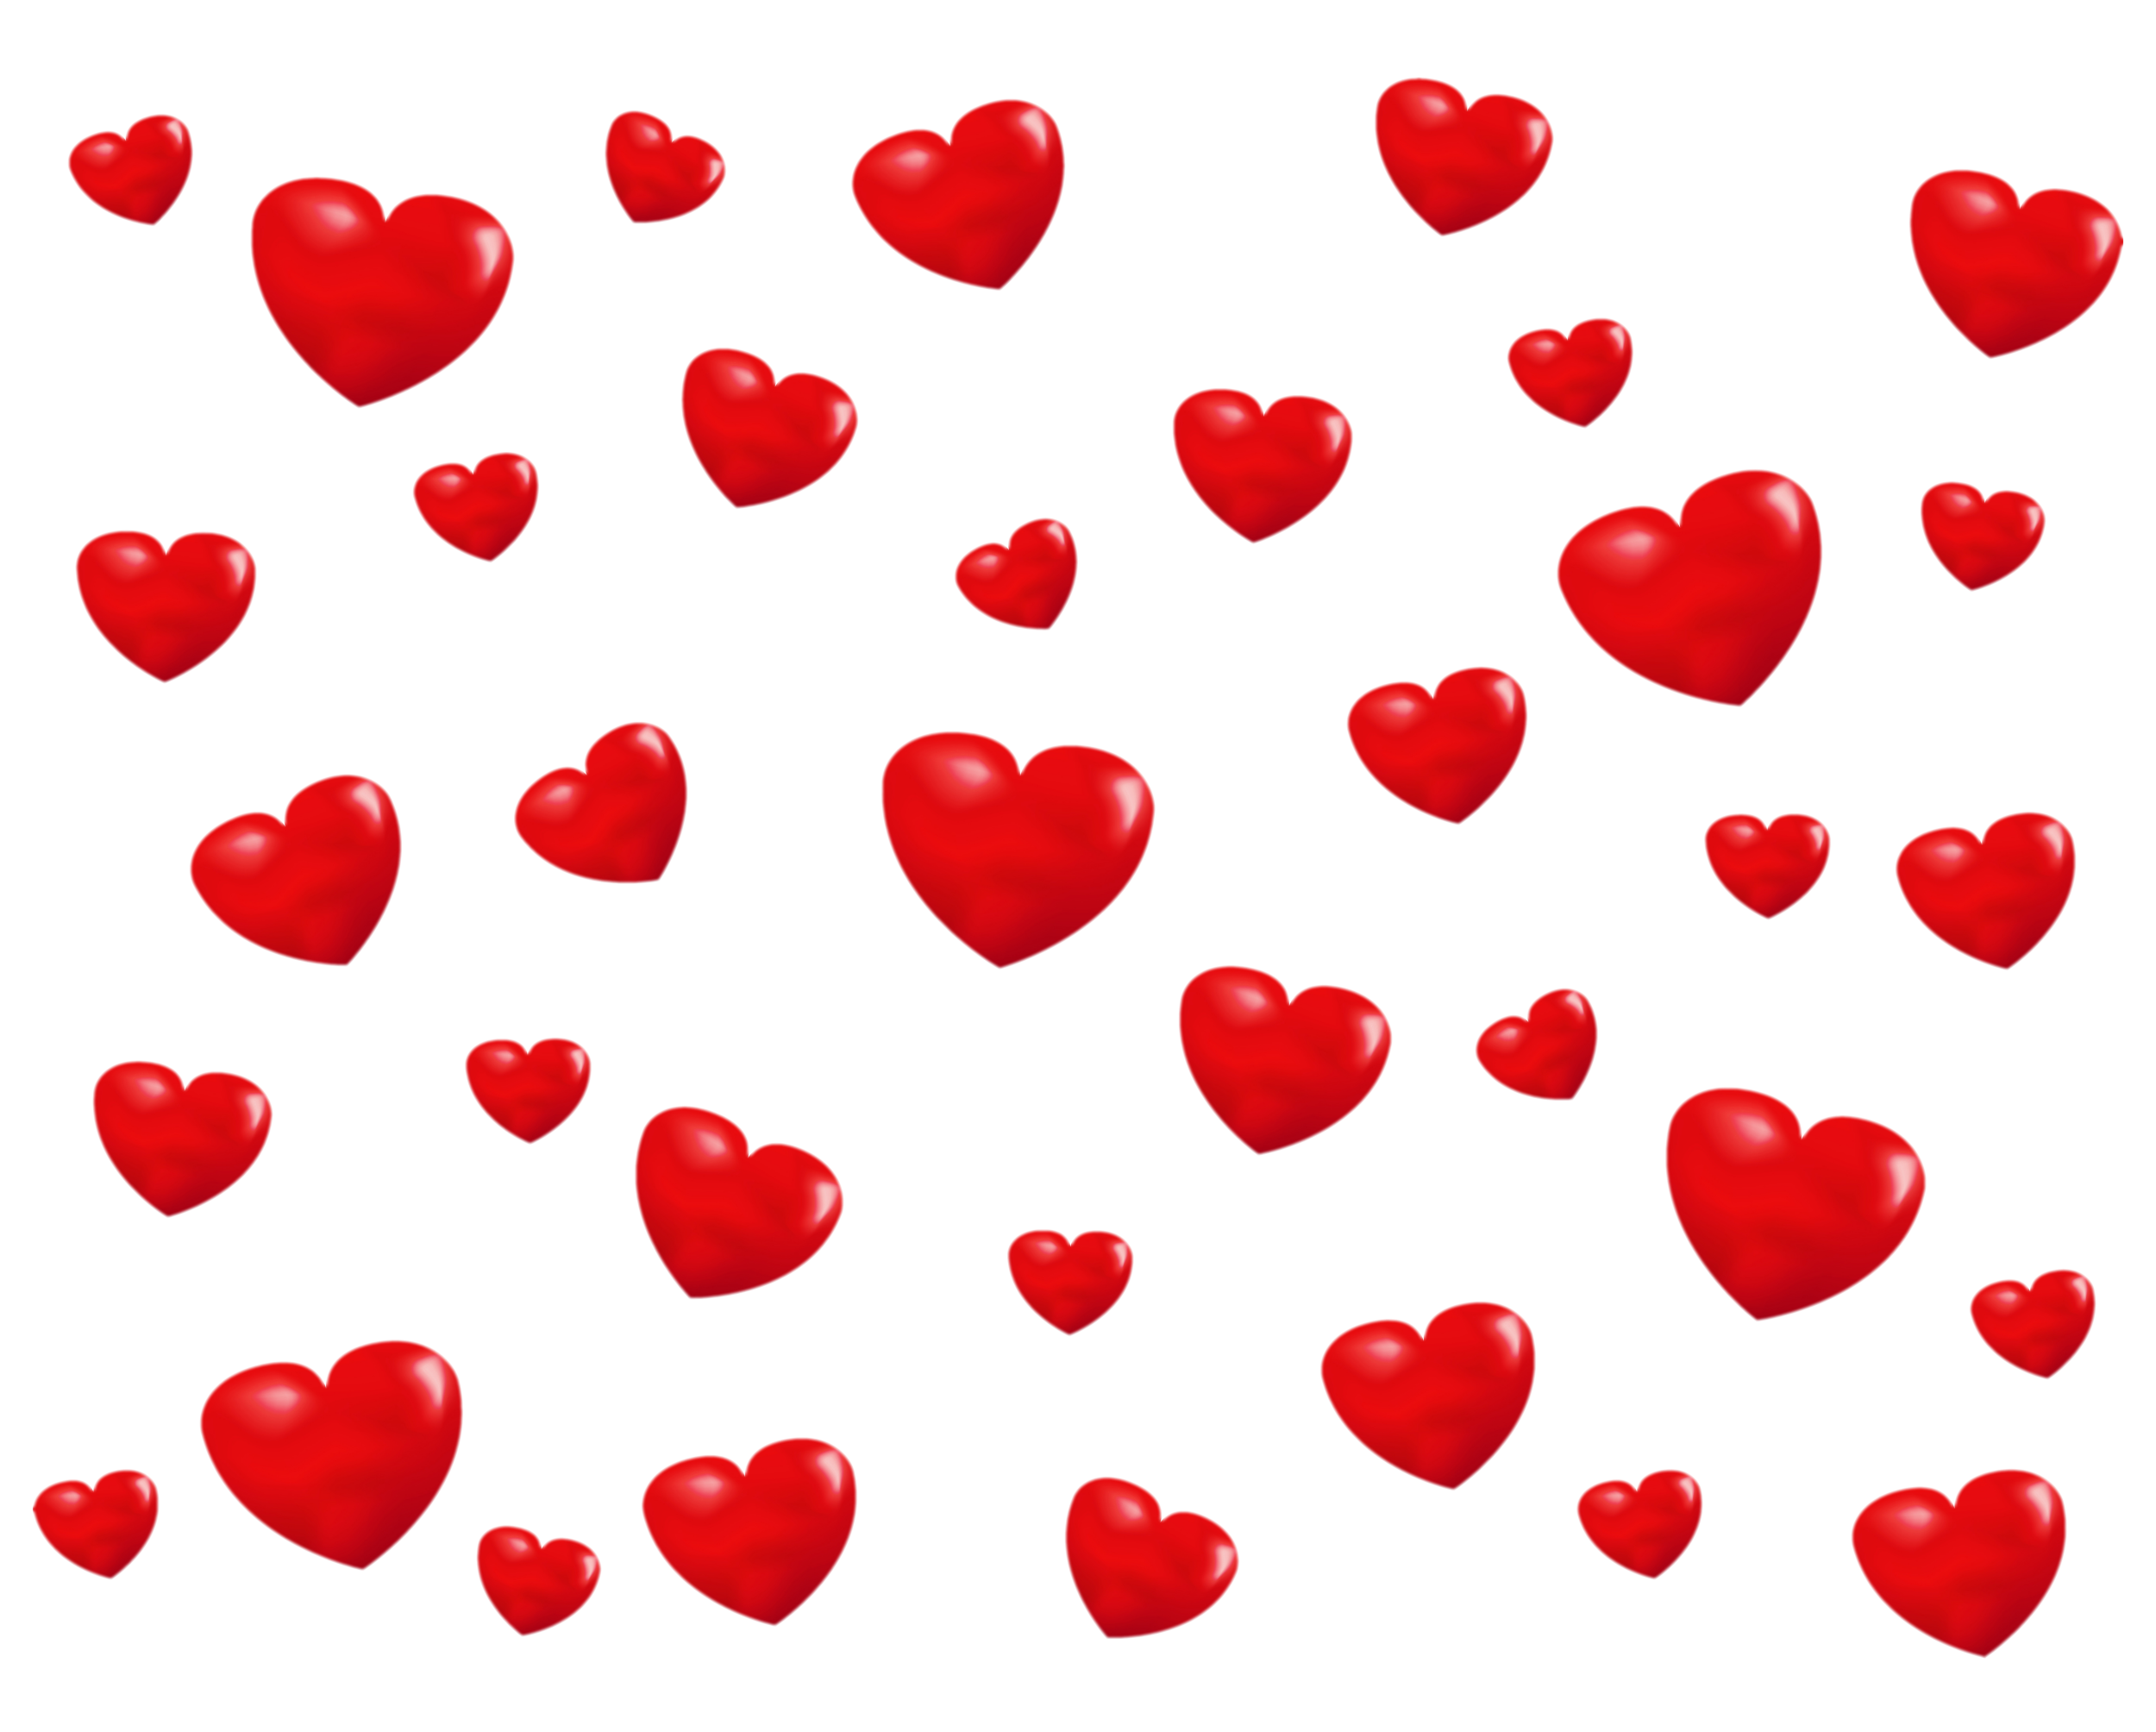 Heart png images with transparent background. Hearts gallery yopriceville view